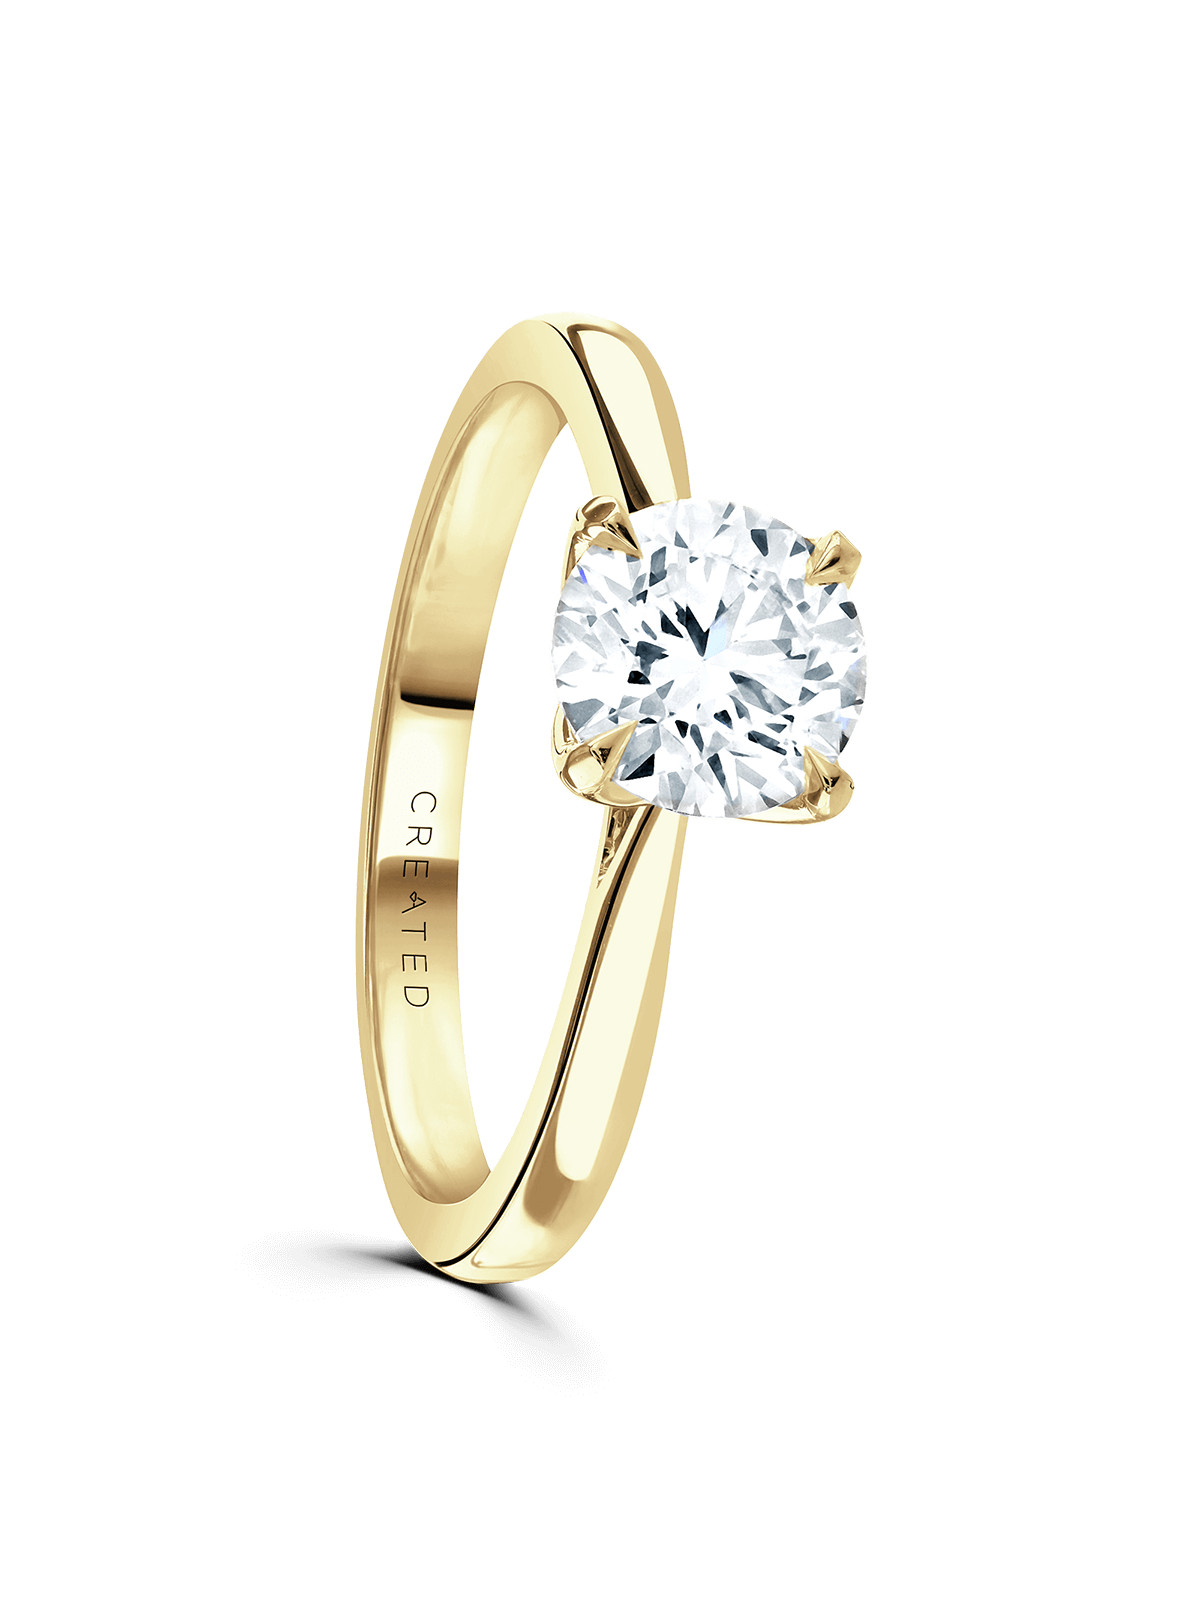 "Magnolia" Approx 1.00ct Brilliant Cut Lab Grown Diamond Solitaire Engagement Ring in 18ct Yellow Gold